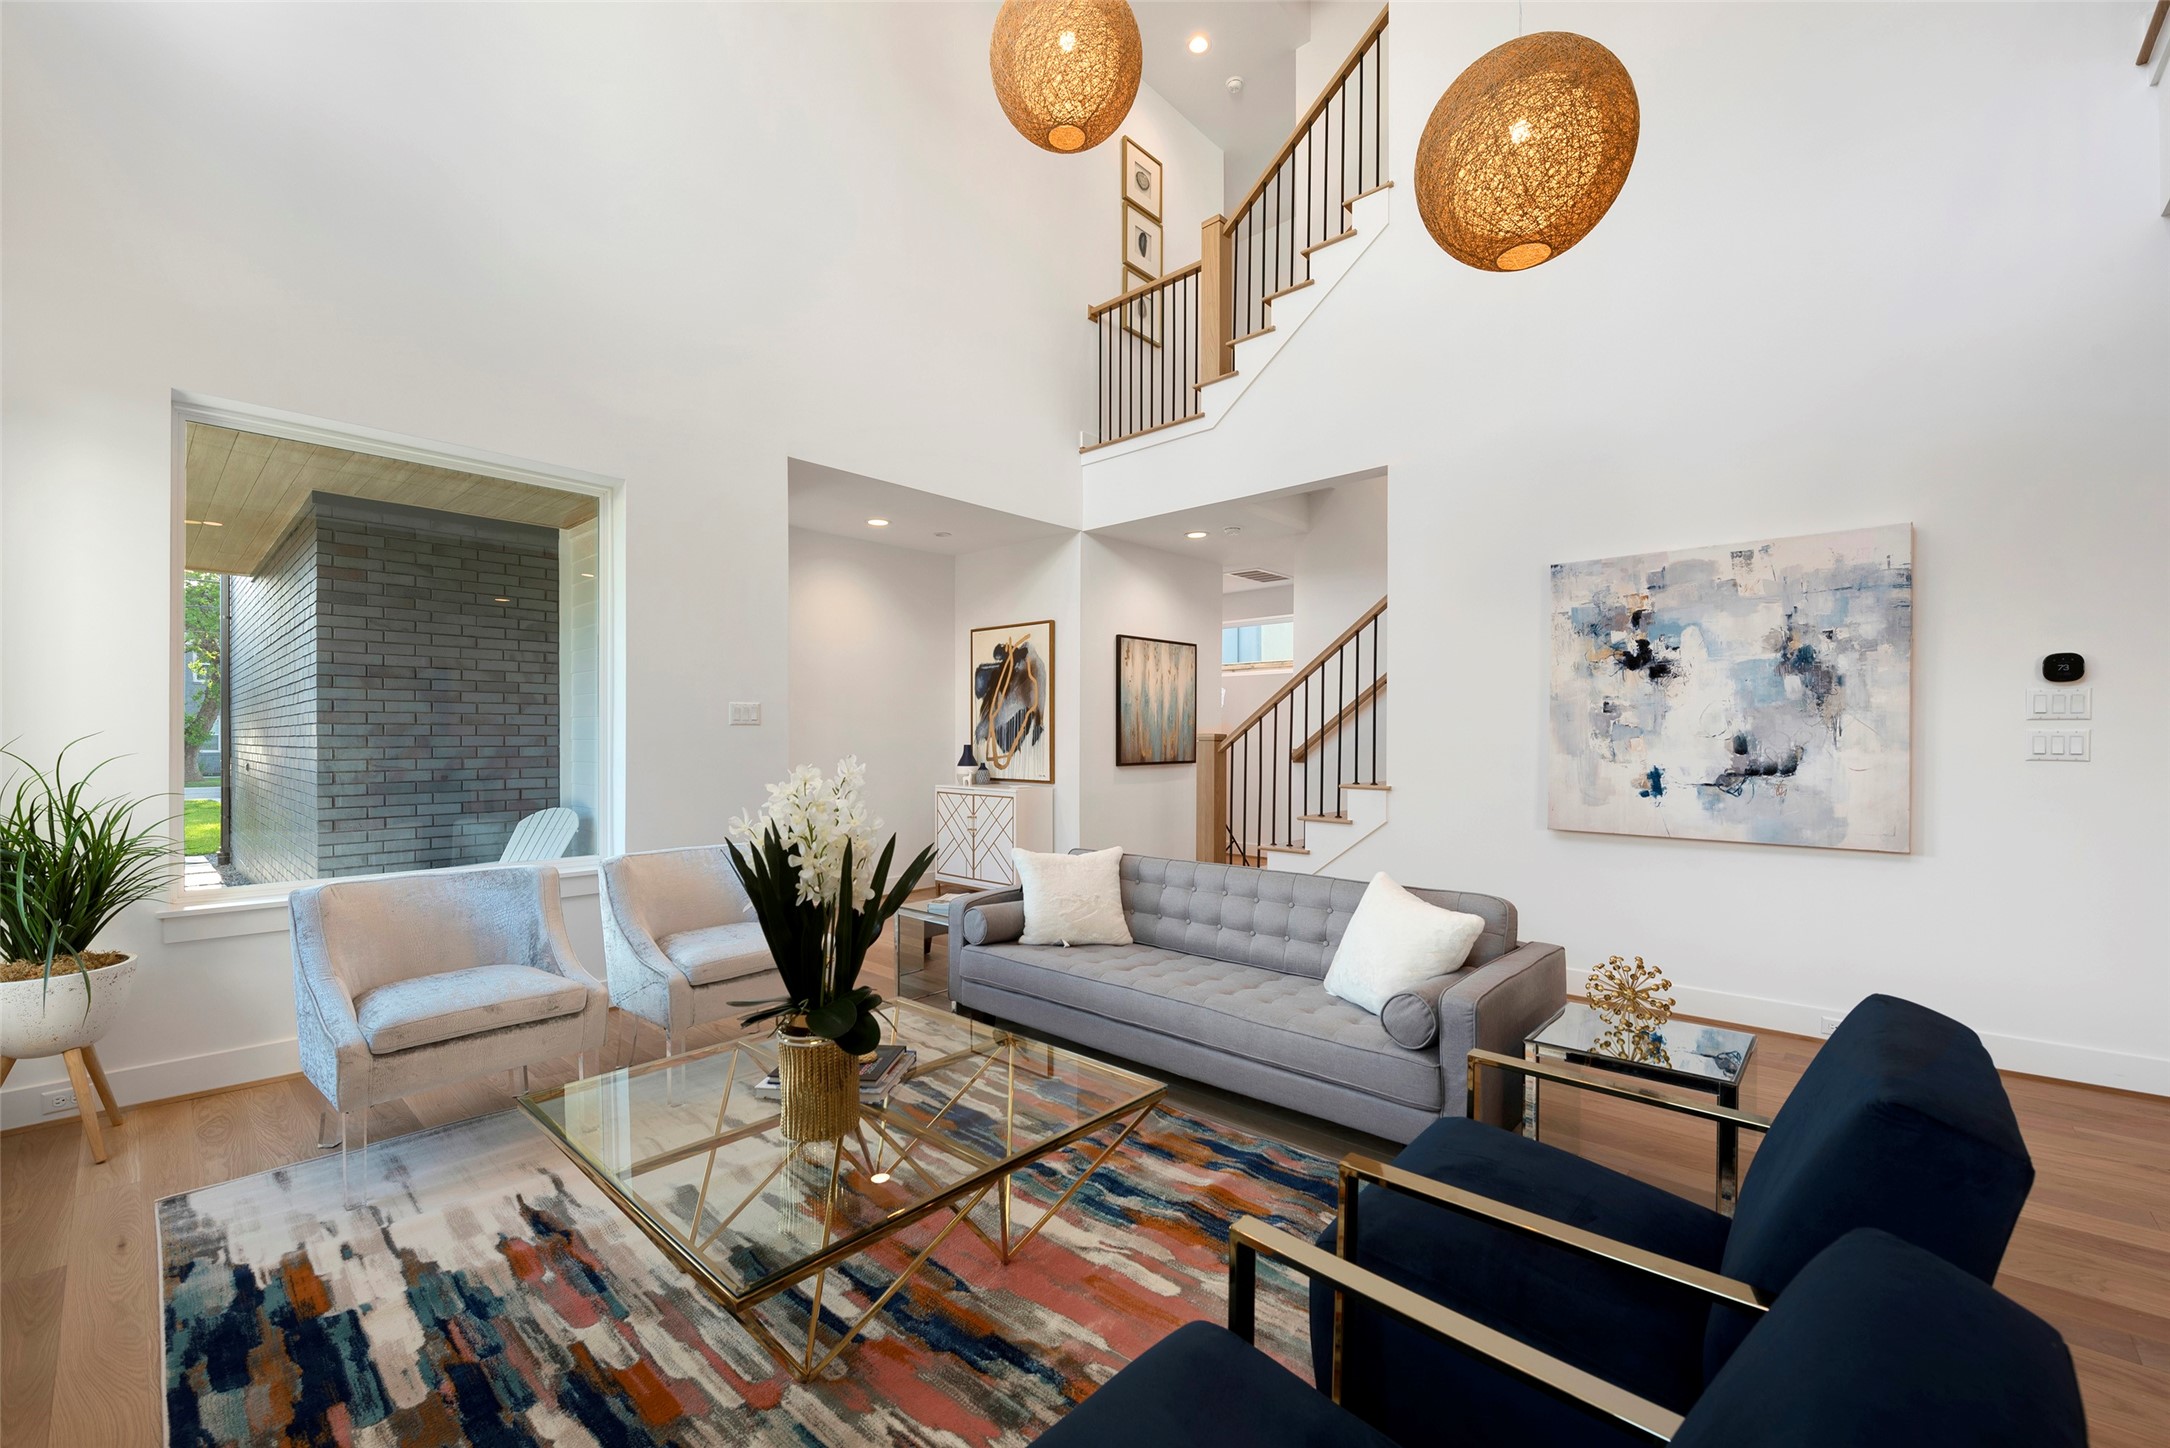 The open concept floor plan offers this beautiful living area with soaring 2-story ceiling.